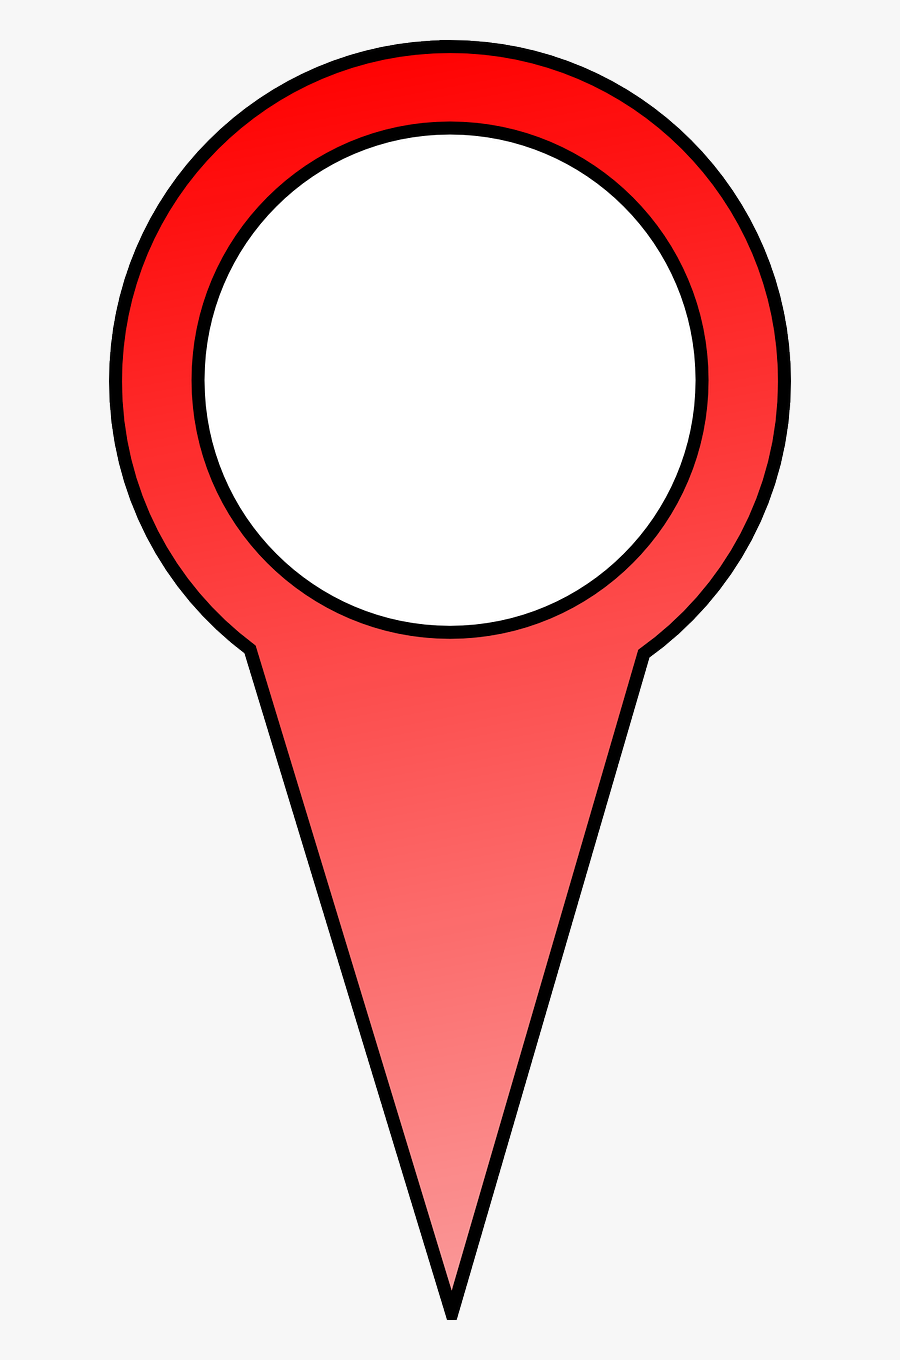 Red Map Pin - Map Pin Clip Art, Transparent Clipart